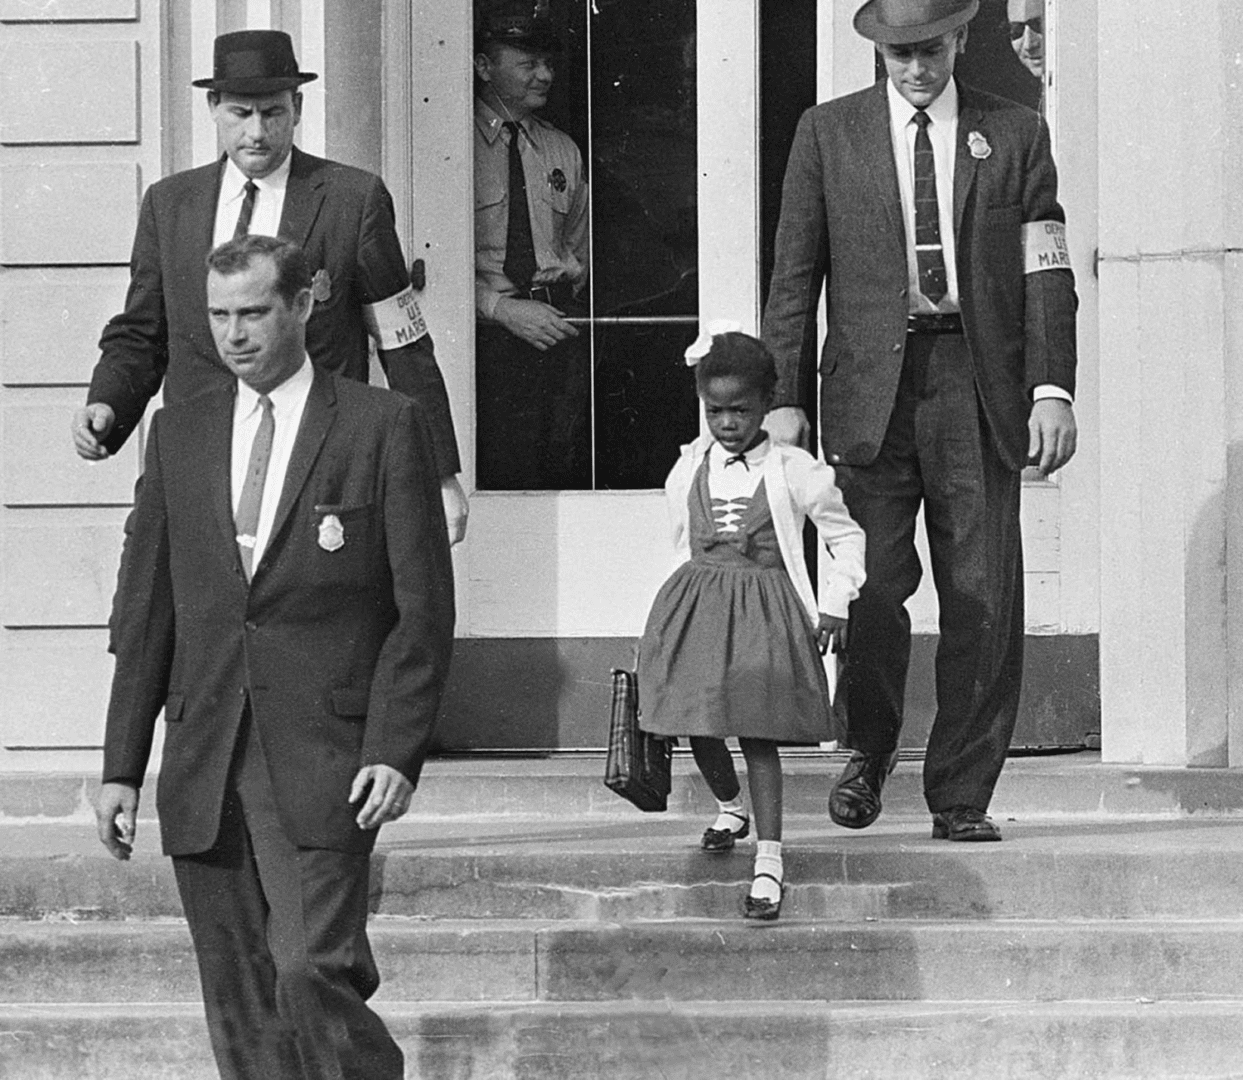 U.S. MARSHALS WITH YOUNG RUBY BRIDGES ON SCHOOL STEPS